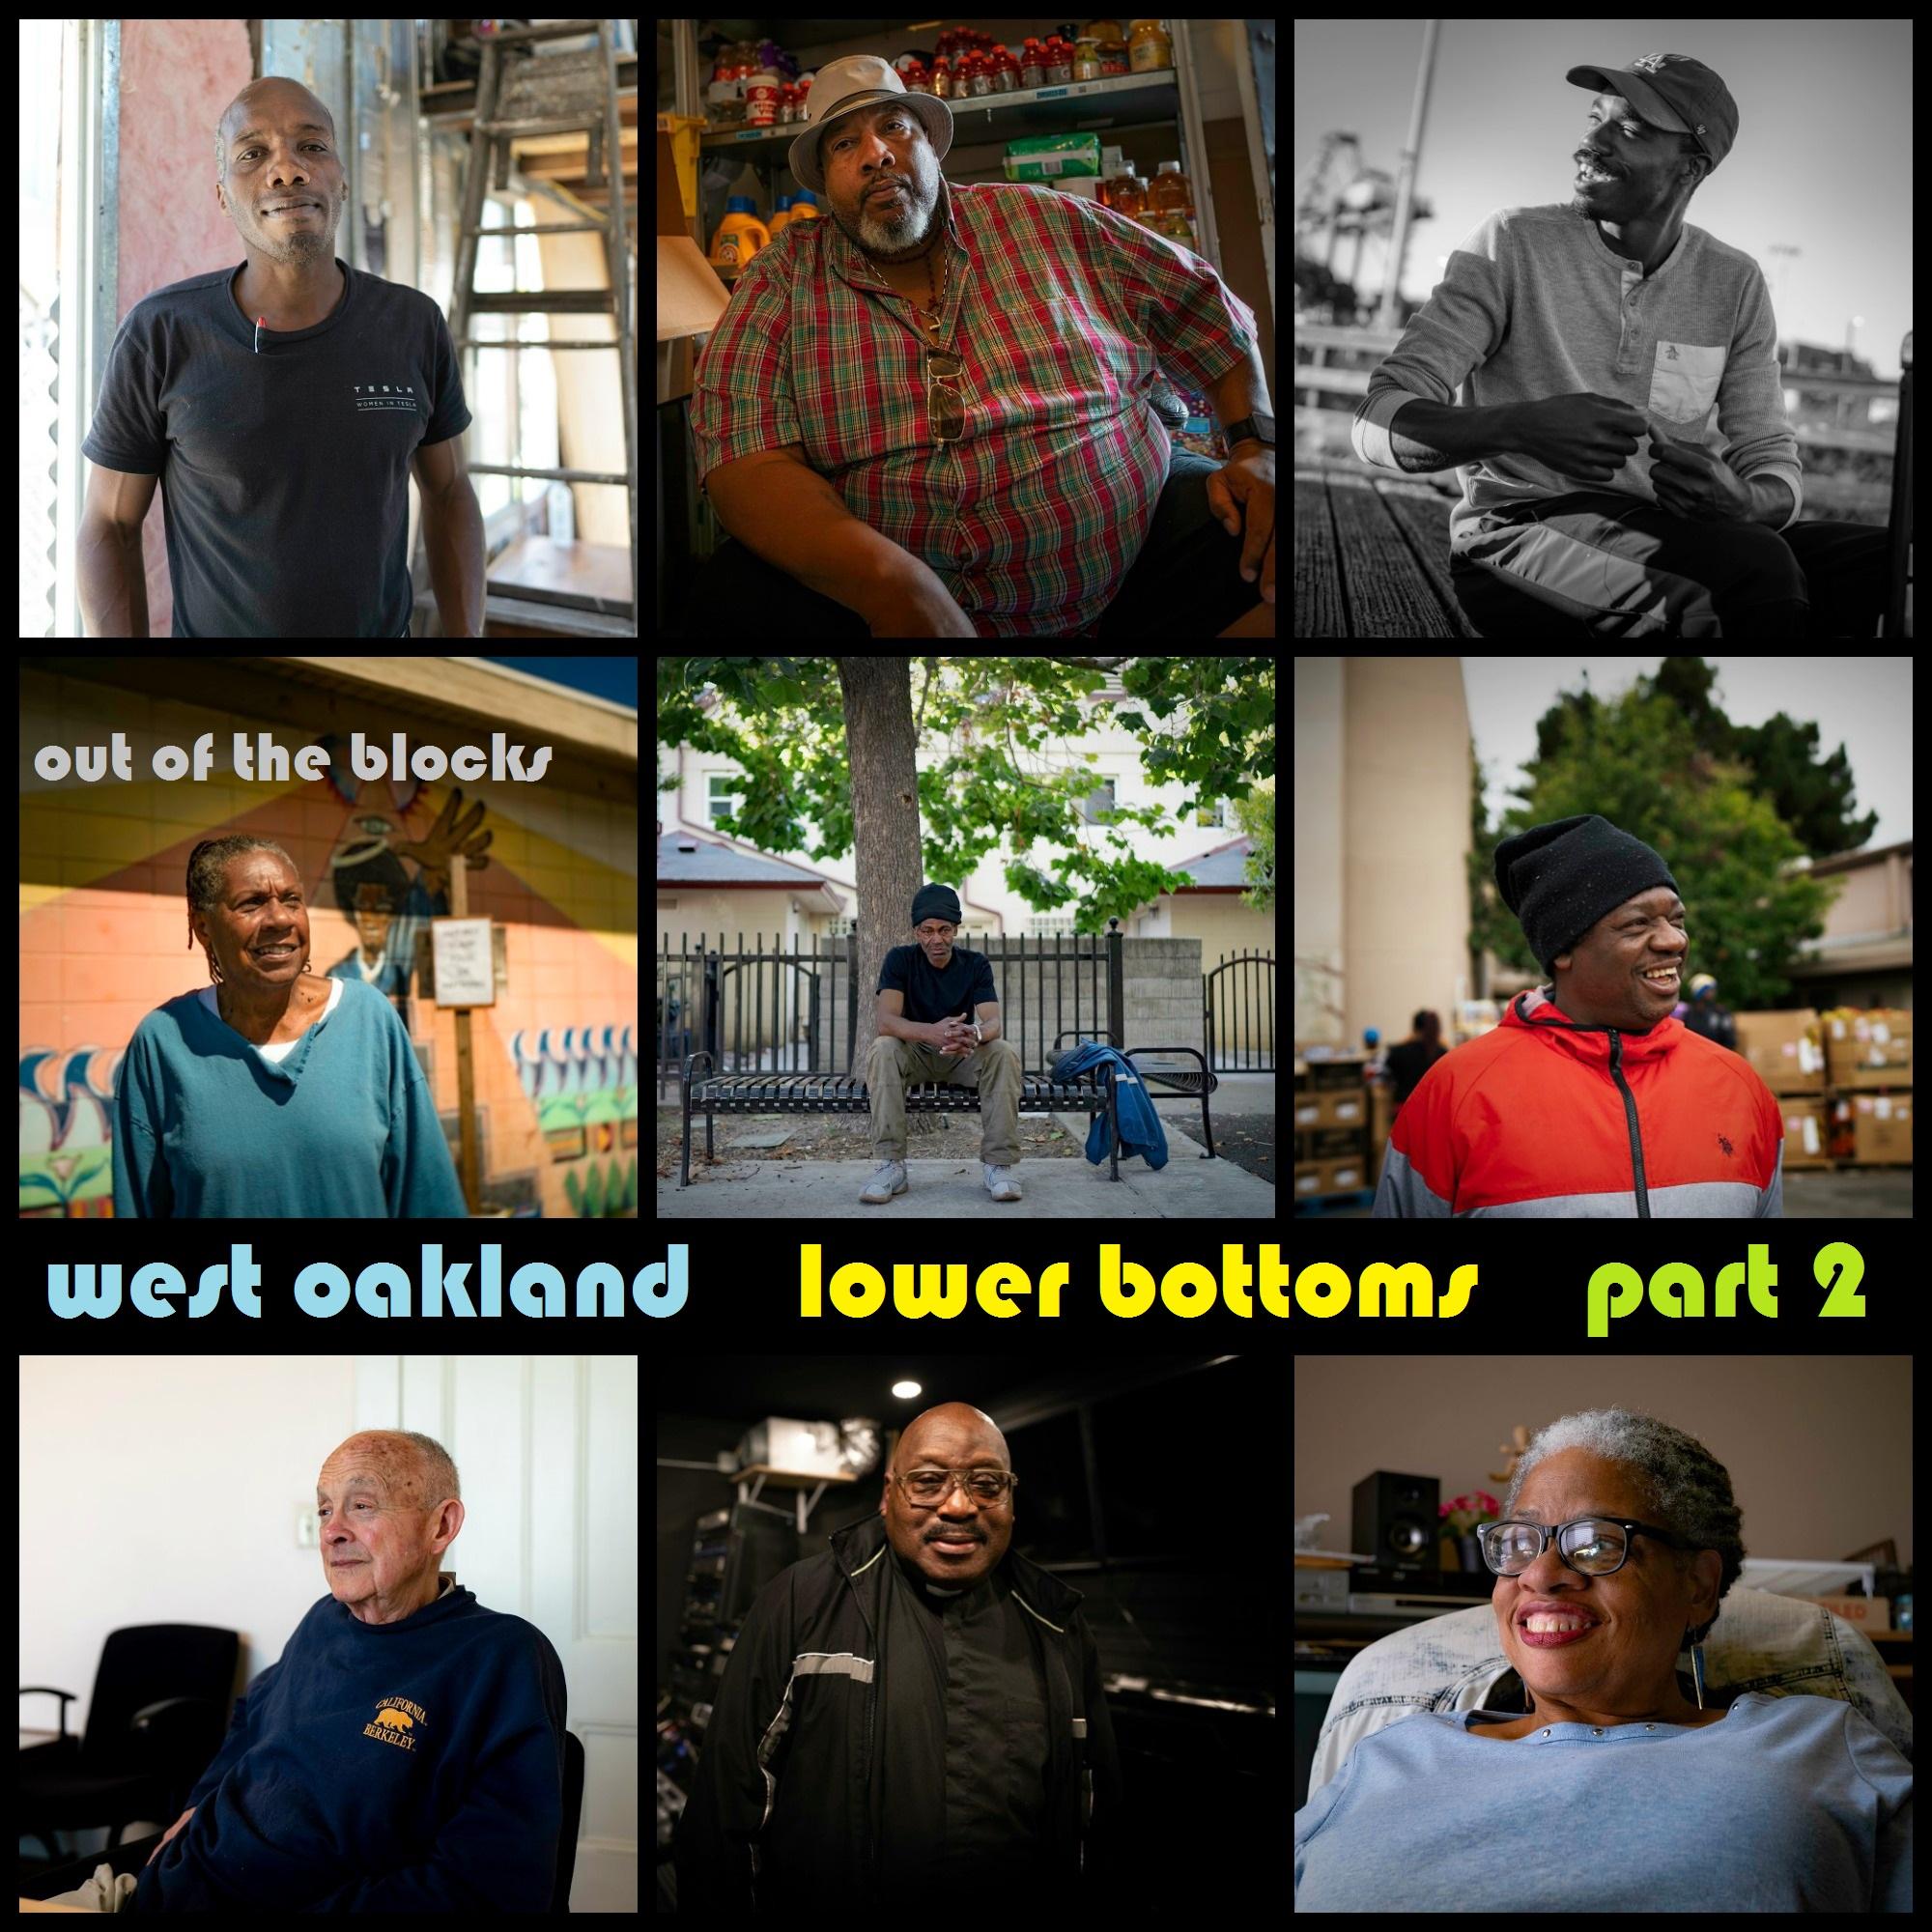 Thumbnail for "West Oakland, Lower Bottoms, part 2: The World We Live In".